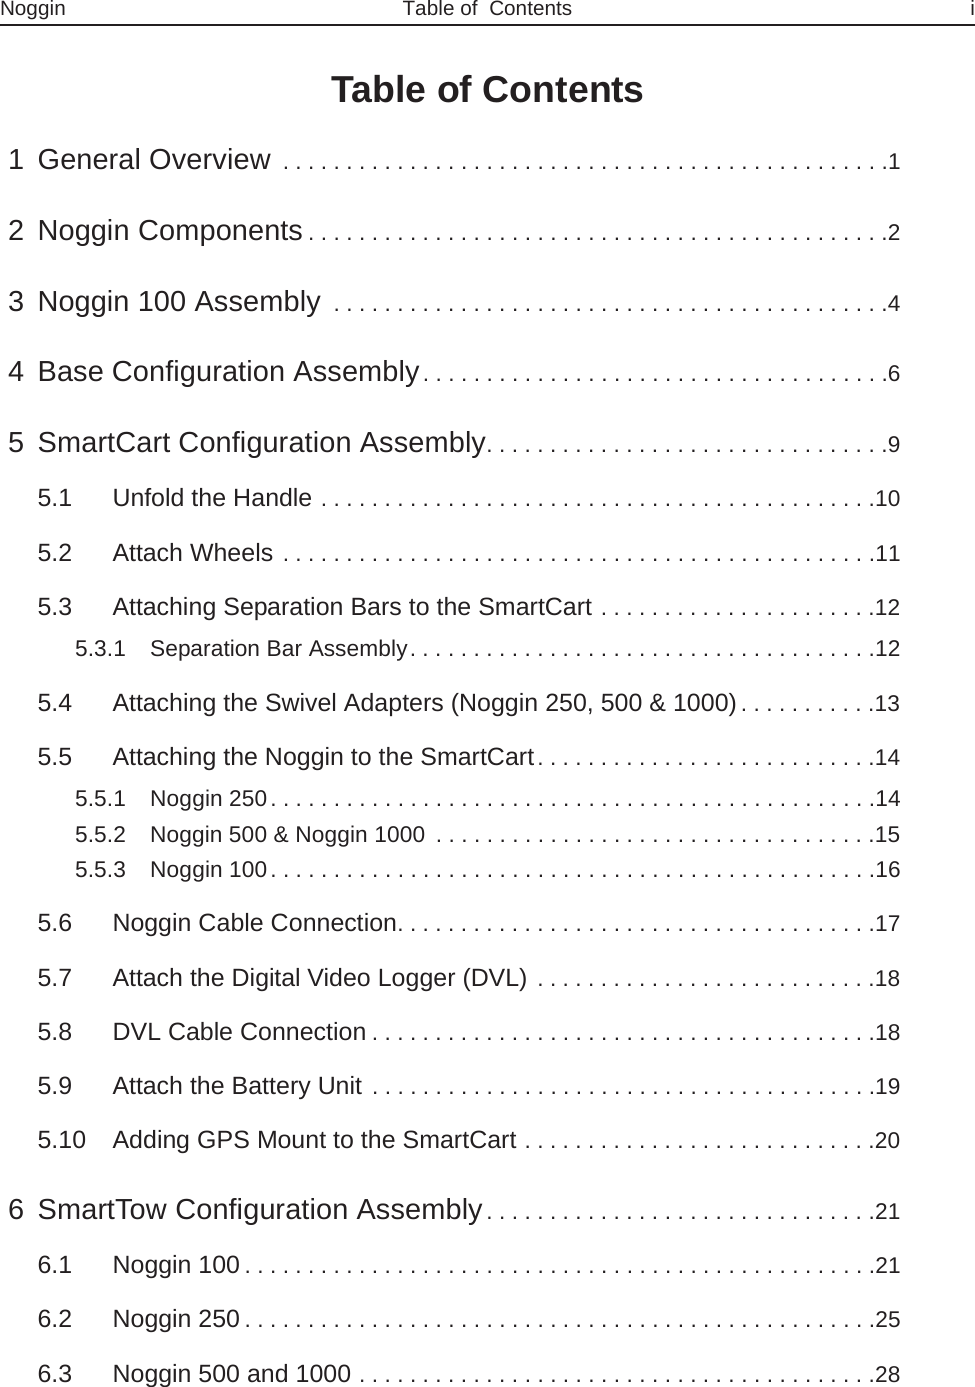 Noggin Table of  Contents iTable of Contents 1 General Overview . . . . . . . . . . . . . . . . . . . . . . . . . . . . . . . . . . . . . . . . . . . . . . . .1 2 Noggin Components. . . . . . . . . . . . . . . . . . . . . . . . . . . . . . . . . . . . . . . . . . . . . .2 3 Noggin 100 Assembly . . . . . . . . . . . . . . . . . . . . . . . . . . . . . . . . . . . . . . . . . . . .4 4 Base Configuration Assembly. . . . . . . . . . . . . . . . . . . . . . . . . . . . . . . . . . . . .6 5 SmartCart Configuration Assembly. . . . . . . . . . . . . . . . . . . . . . . . . . . . . . . .95.1 Unfold the Handle . . . . . . . . . . . . . . . . . . . . . . . . . . . . . . . . . . . . . . . . . . . .105.2 Attach Wheels . . . . . . . . . . . . . . . . . . . . . . . . . . . . . . . . . . . . . . . . . . . . . . .115.3 Attaching Separation Bars to the SmartCart . . . . . . . . . . . . . . . . . . . . . .125.3.1 Separation Bar Assembly. . . . . . . . . . . . . . . . . . . . . . . . . . . . . . . . . . . . .125.4 Attaching the Swivel Adapters (Noggin 250, 500 &amp; 1000). . . . . . . . . . .135.5 Attaching the Noggin to the SmartCart. . . . . . . . . . . . . . . . . . . . . . . . . . .145.5.1 Noggin 250. . . . . . . . . . . . . . . . . . . . . . . . . . . . . . . . . . . . . . . . . . . . . . . .145.5.2 Noggin 500 &amp; Noggin 1000  . . . . . . . . . . . . . . . . . . . . . . . . . . . . . . . . . . .155.5.3 Noggin 100. . . . . . . . . . . . . . . . . . . . . . . . . . . . . . . . . . . . . . . . . . . . . . . .165.6 Noggin Cable Connection. . . . . . . . . . . . . . . . . . . . . . . . . . . . . . . . . . . . . .175.7 Attach the Digital Video Logger (DVL) . . . . . . . . . . . . . . . . . . . . . . . . . . .185.8 DVL Cable Connection. . . . . . . . . . . . . . . . . . . . . . . . . . . . . . . . . . . . . . . .185.9 Attach the Battery Unit . . . . . . . . . . . . . . . . . . . . . . . . . . . . . . . . . . . . . . . .195.10 Adding GPS Mount to the SmartCart . . . . . . . . . . . . . . . . . . . . . . . . . . . .20 6 SmartTow Configuration Assembly. . . . . . . . . . . . . . . . . . . . . . . . . . . . . . .216.1 Noggin 100. . . . . . . . . . . . . . . . . . . . . . . . . . . . . . . . . . . . . . . . . . . . . . . . . .216.2 Noggin 250. . . . . . . . . . . . . . . . . . . . . . . . . . . . . . . . . . . . . . . . . . . . . . . . . .256.3 Noggin 500 and 1000 . . . . . . . . . . . . . . . . . . . . . . . . . . . . . . . . . . . . . . . . .28